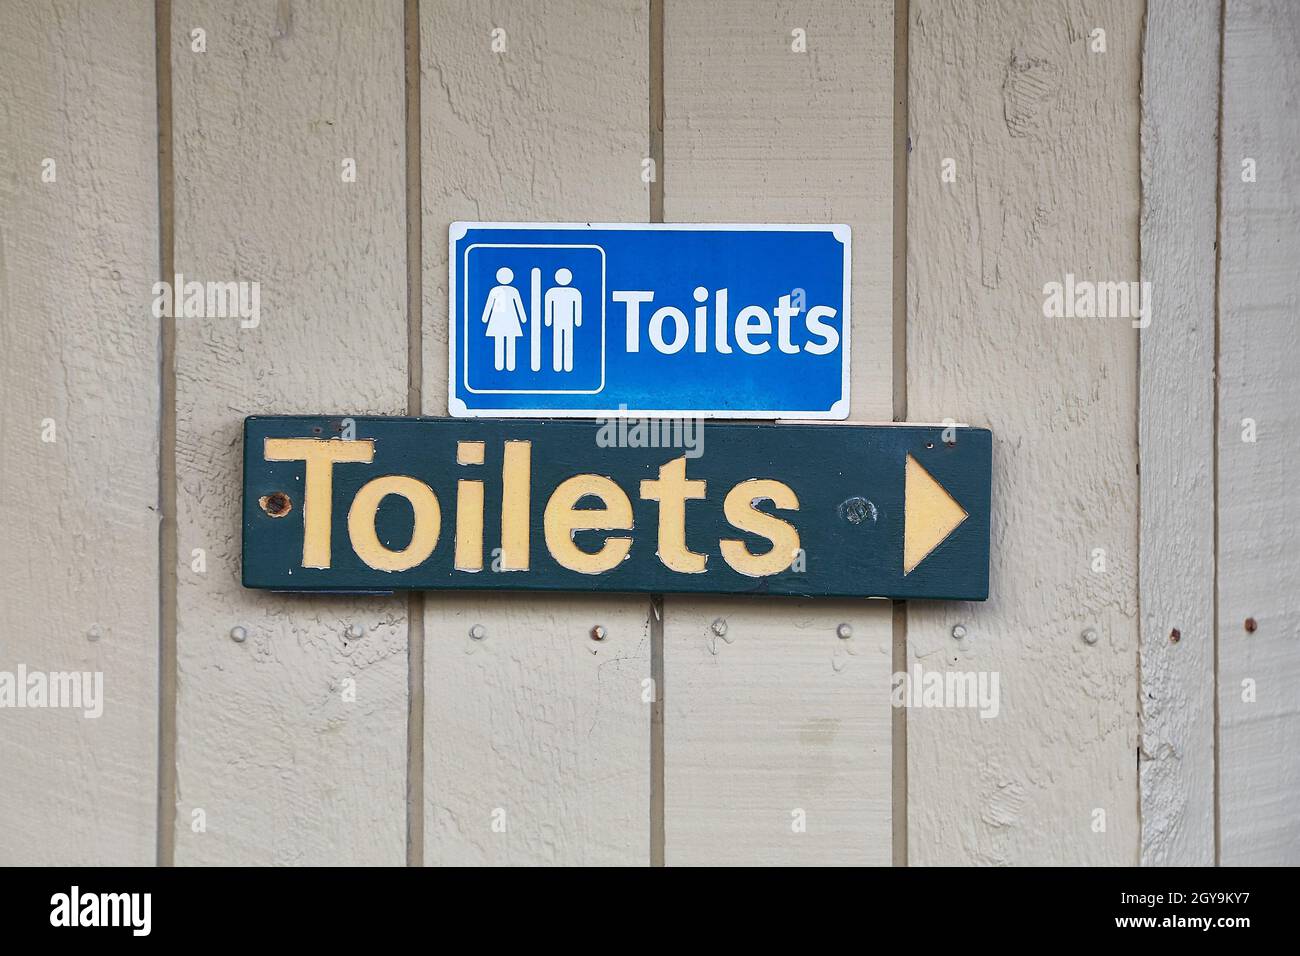 Public toilets signs on a wooden building, arrow shoing direction Stock Photo